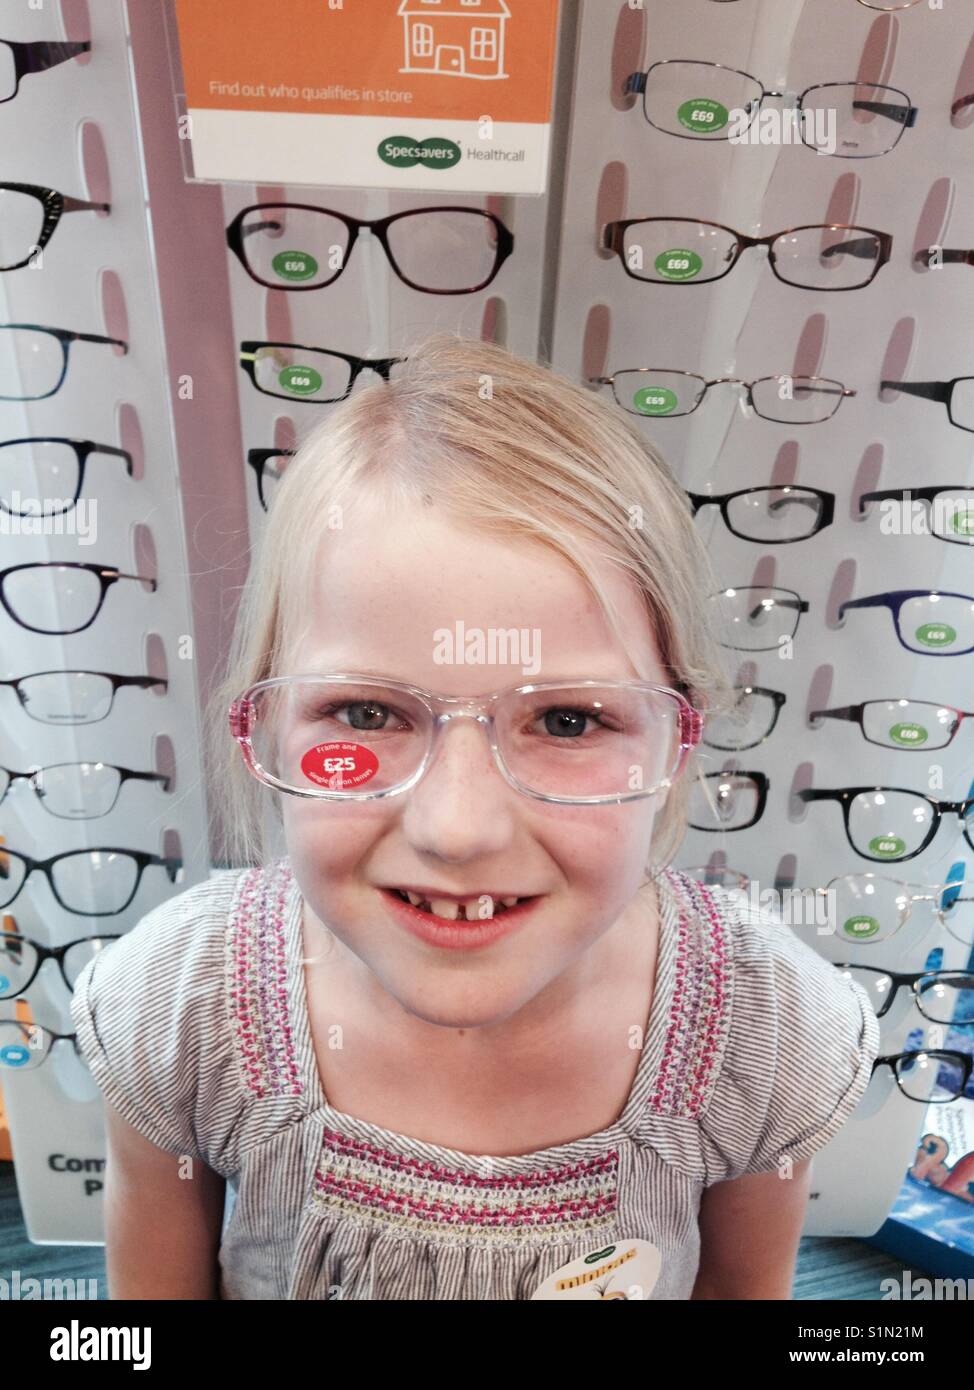 Seven year old girl tries new prescription glasses / spectacles on at an optician store. Stock Photo